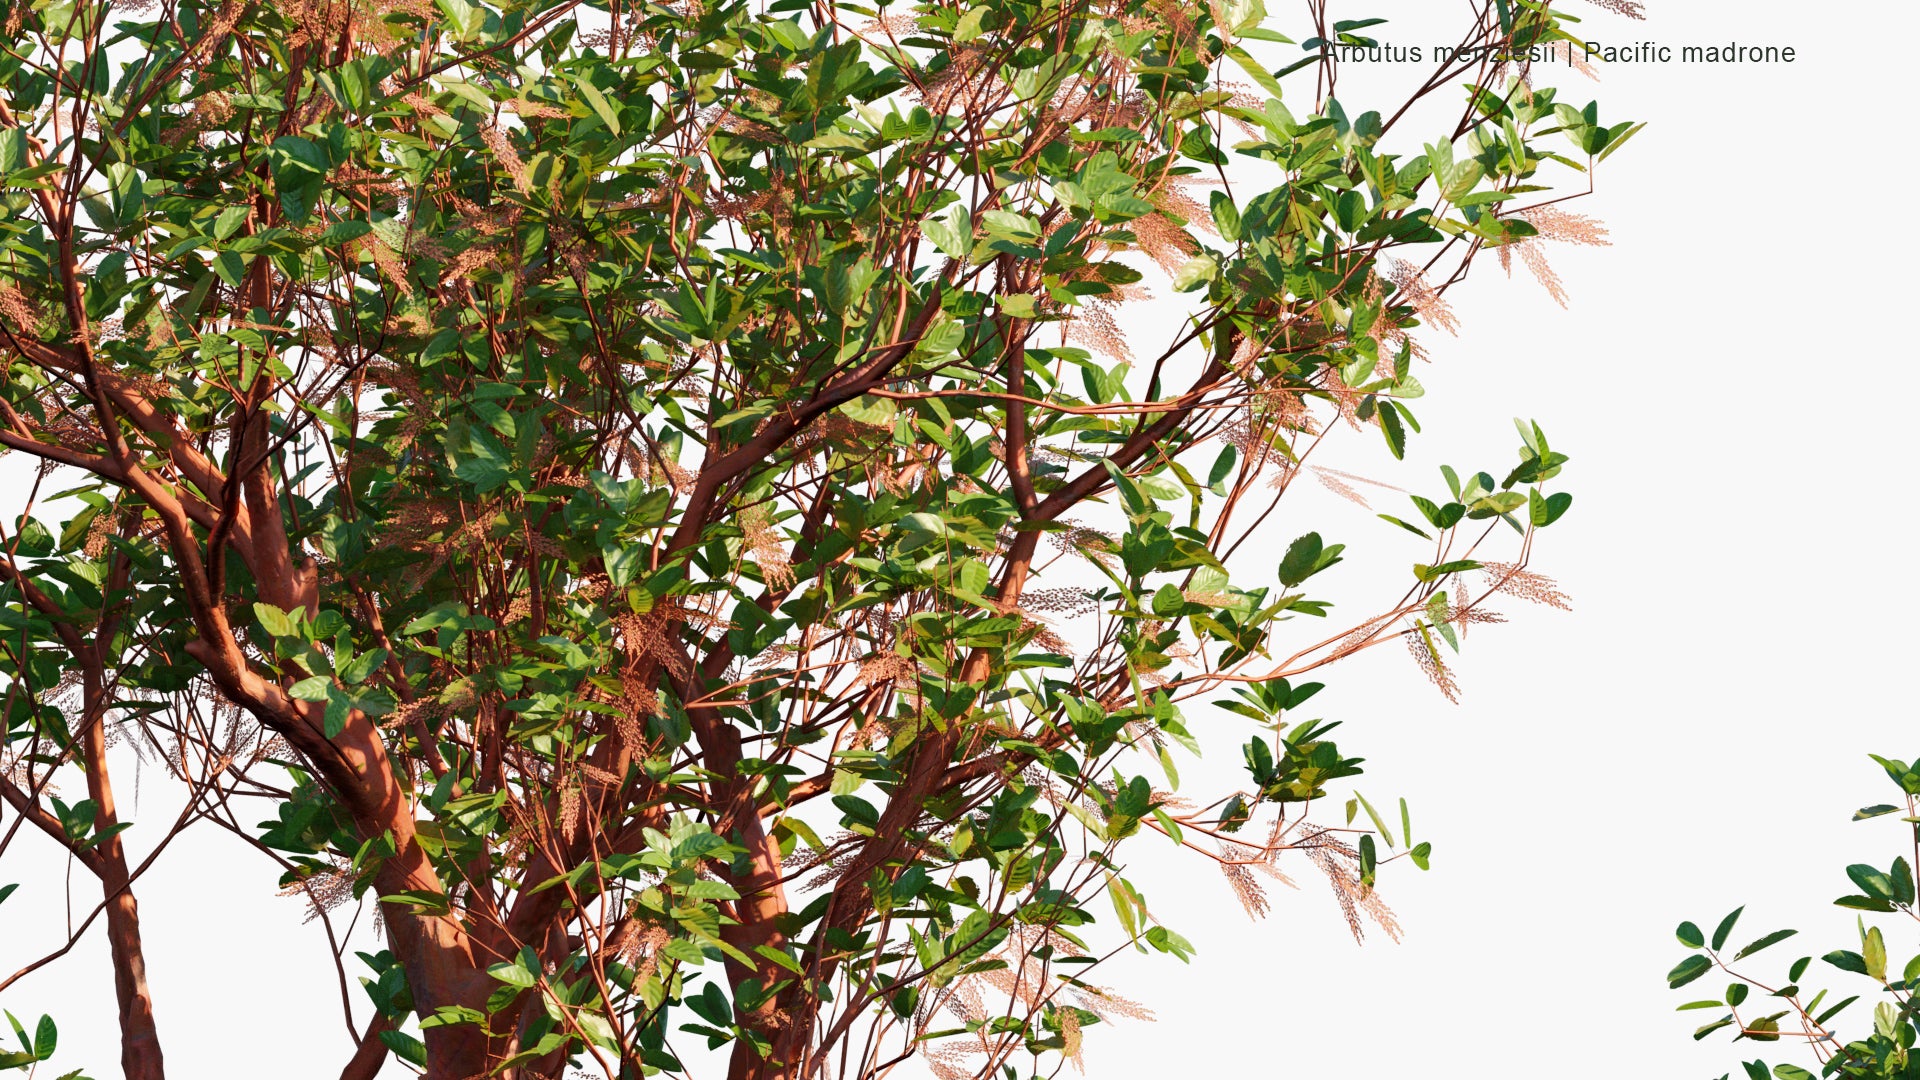 Low Poly Arbutus Menziesii - Pacific Madrone (3D Model)